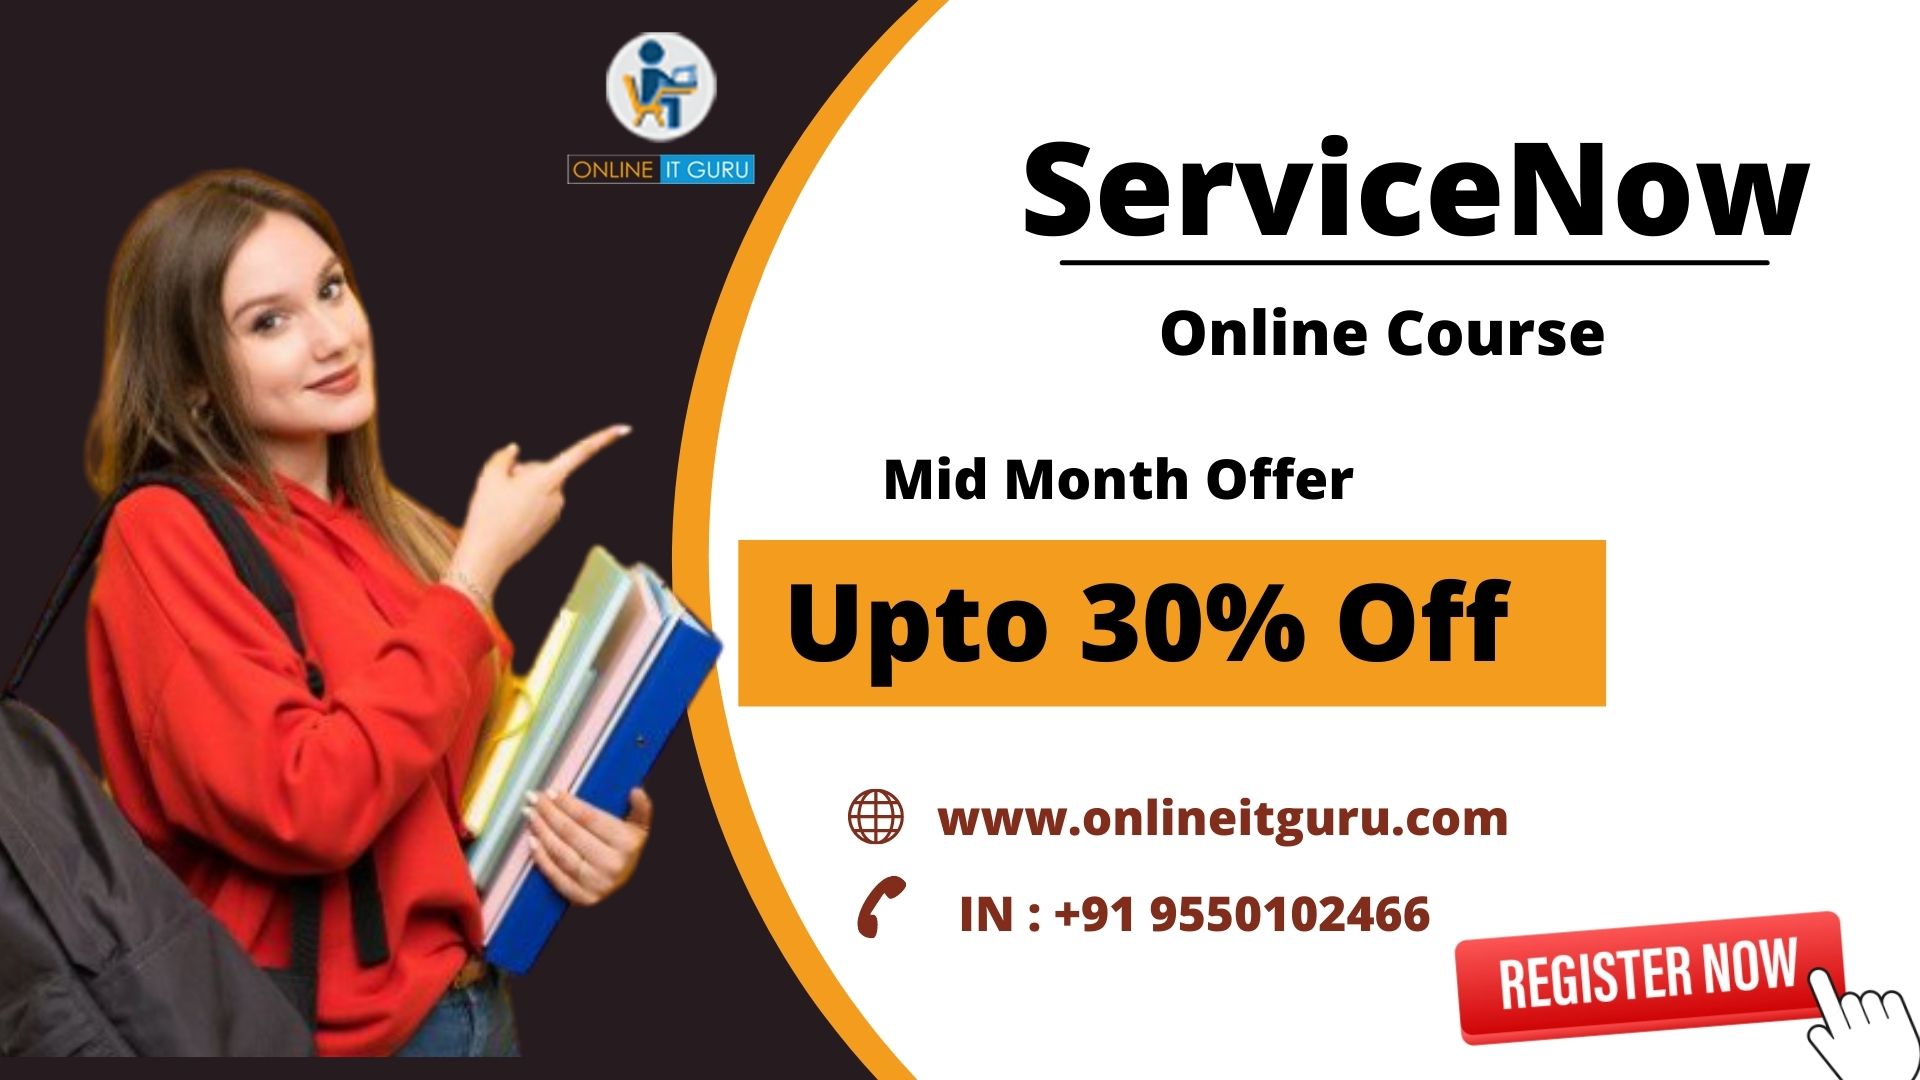 ServiceNow Online Training | ServiceNow Training in ameerpet, Hyderabad, Telangana, India